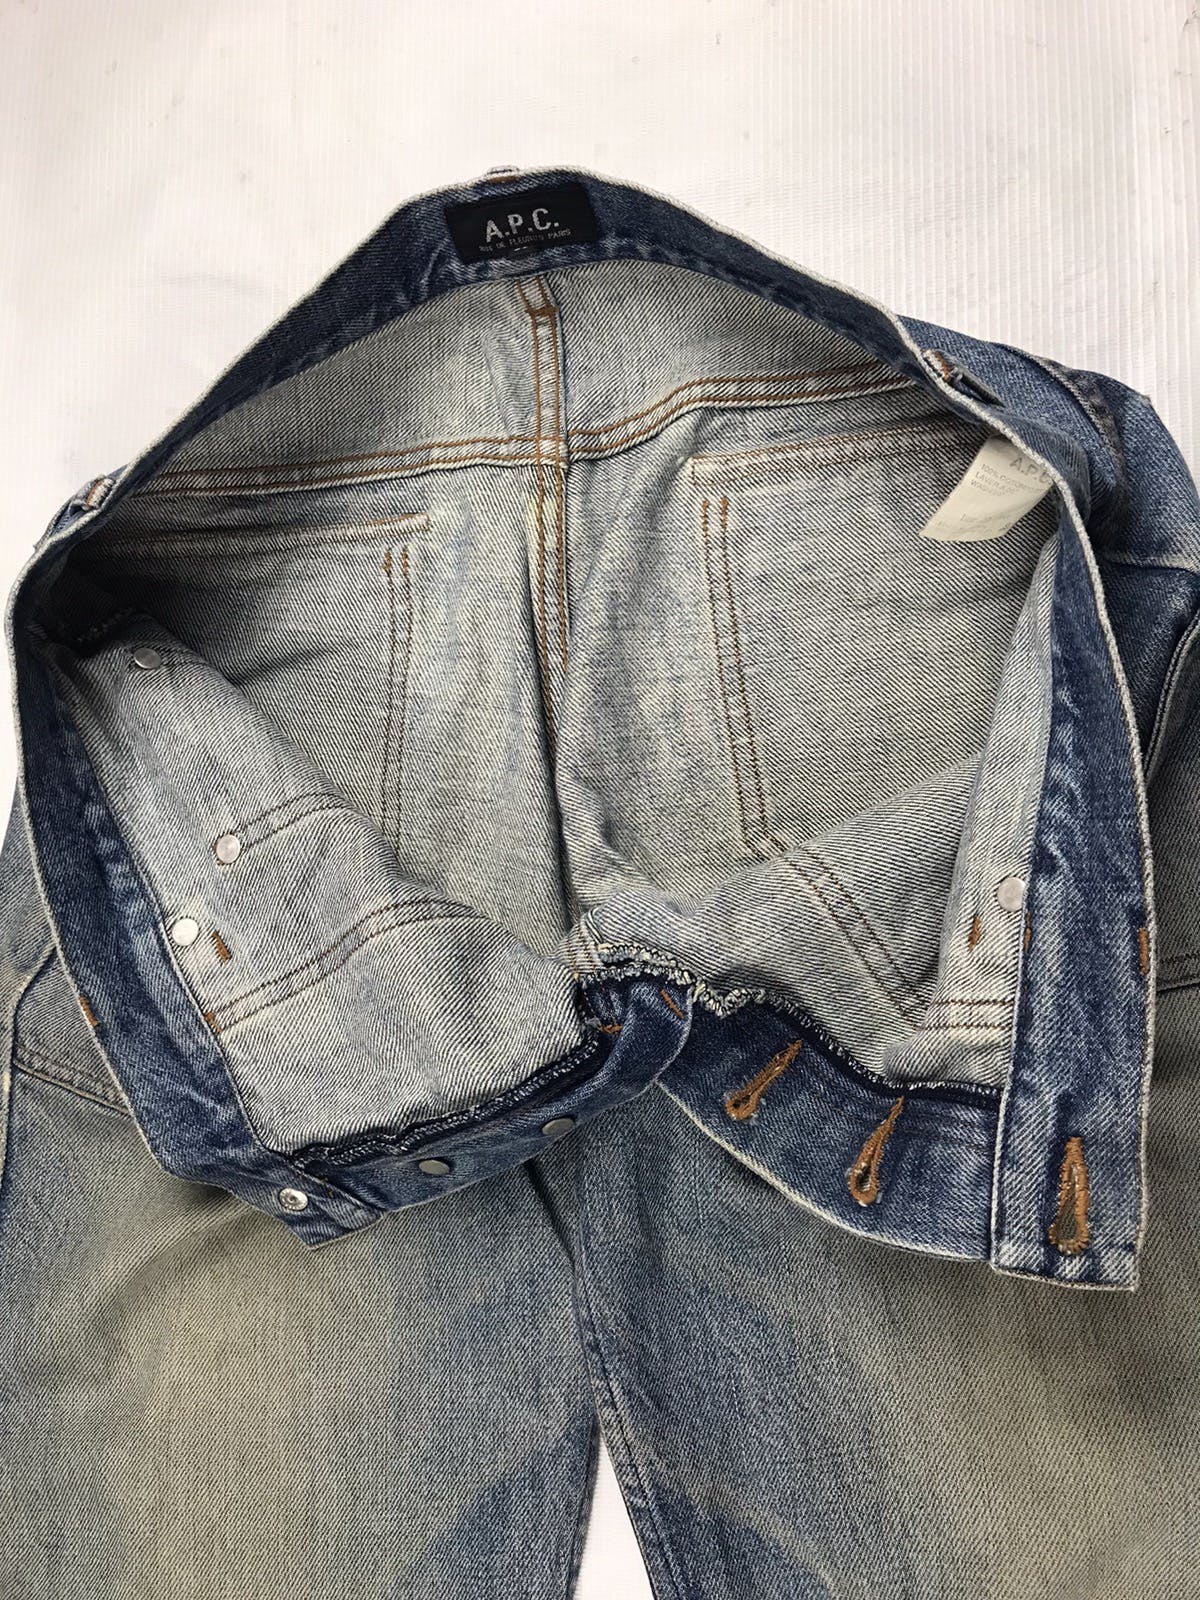 Rare!! A.P.C patch pocket distressed denim Made in Japan - 7